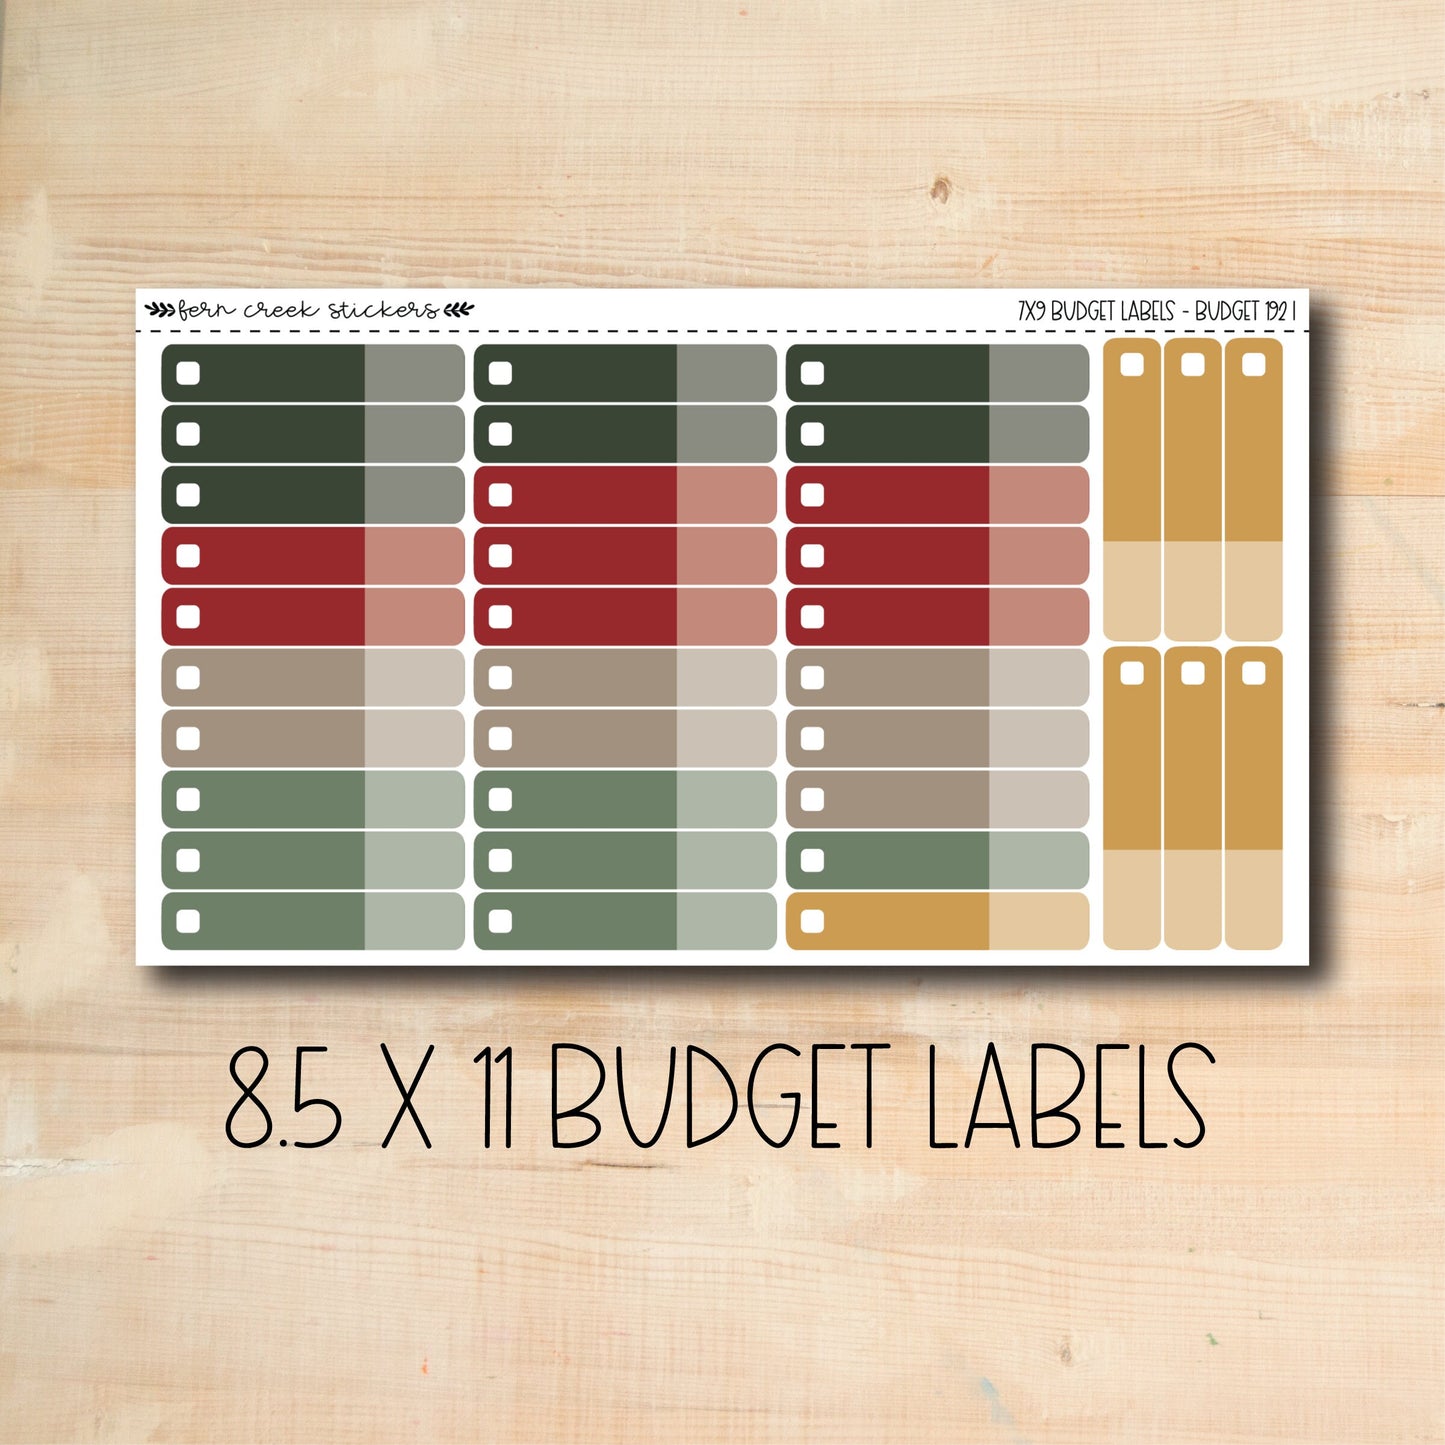 BUDGET-192 || CHRISTMAS CHEER 8.5x11 budget labels